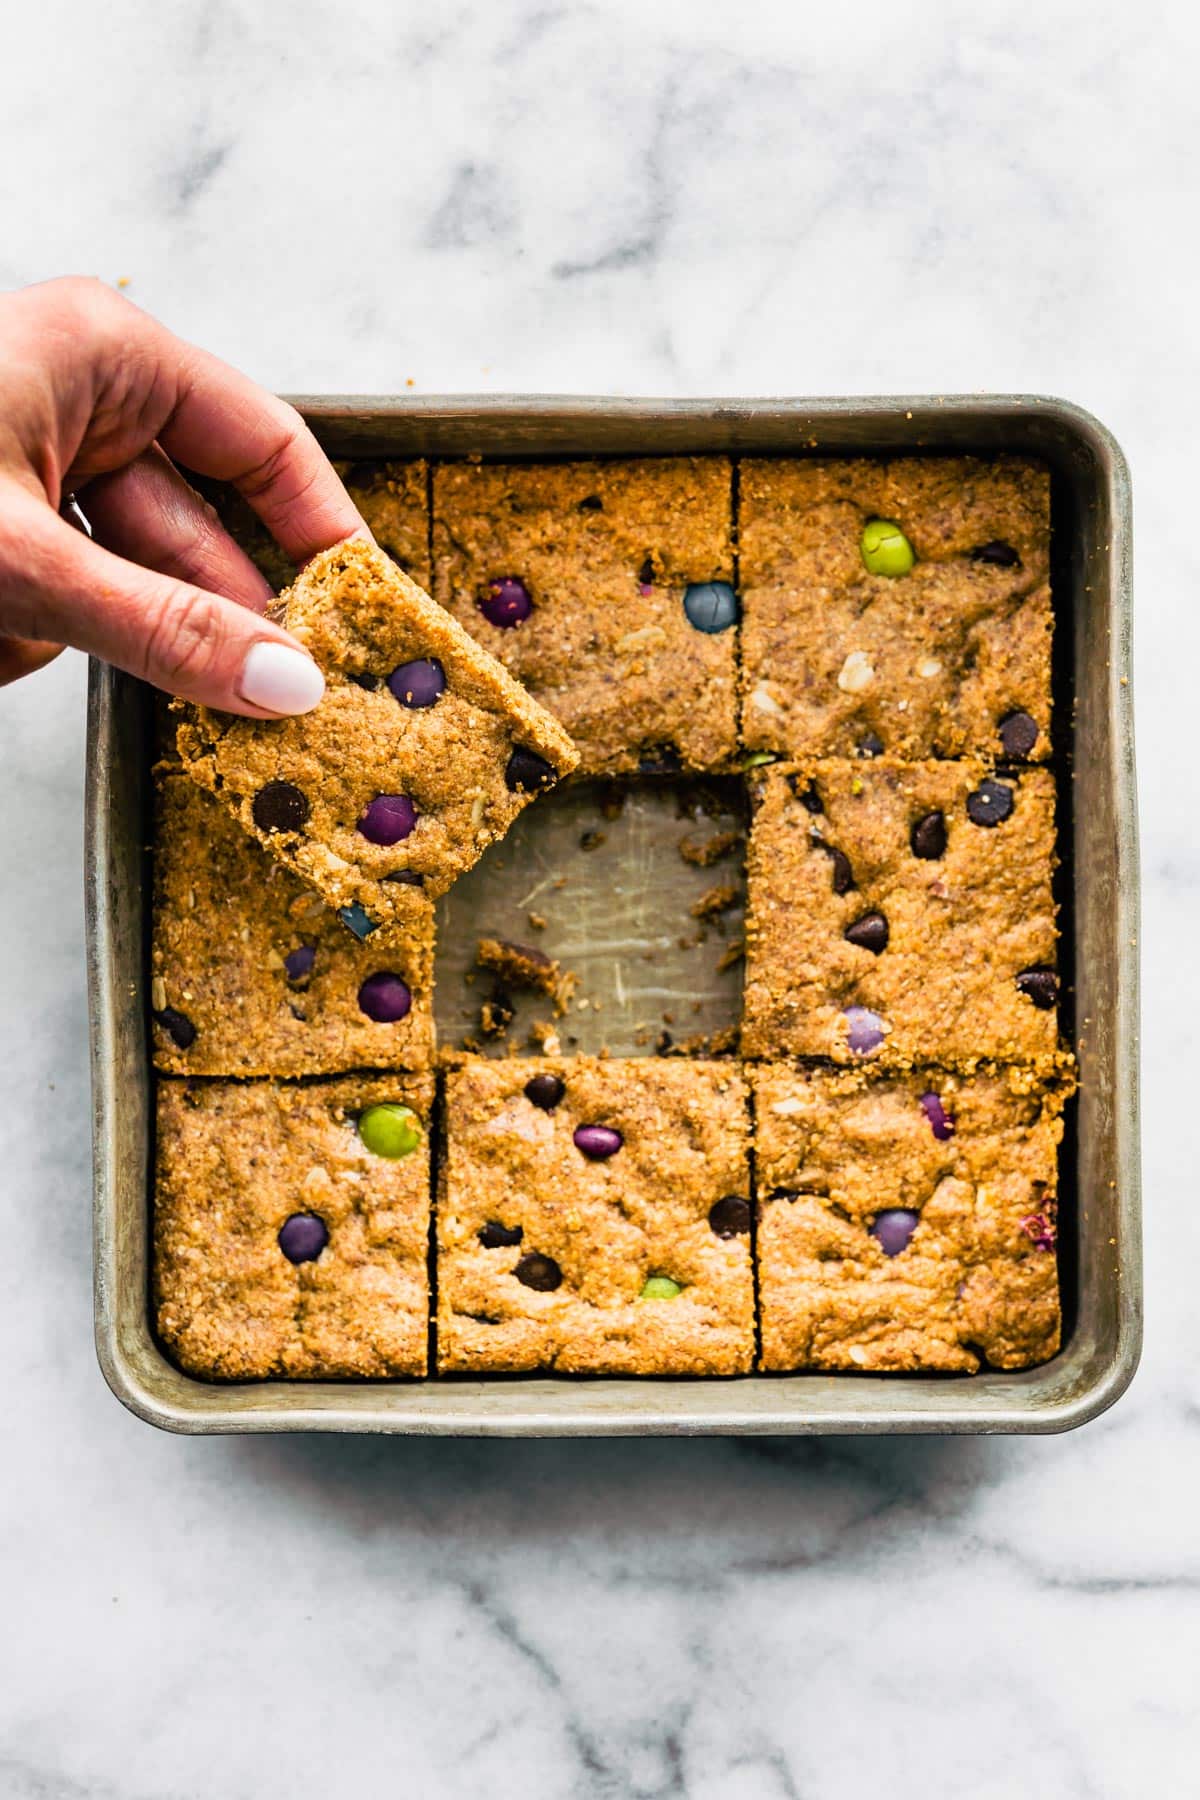 A hand grabbing a gluten free cookie bar from the middle of a pan of bars.